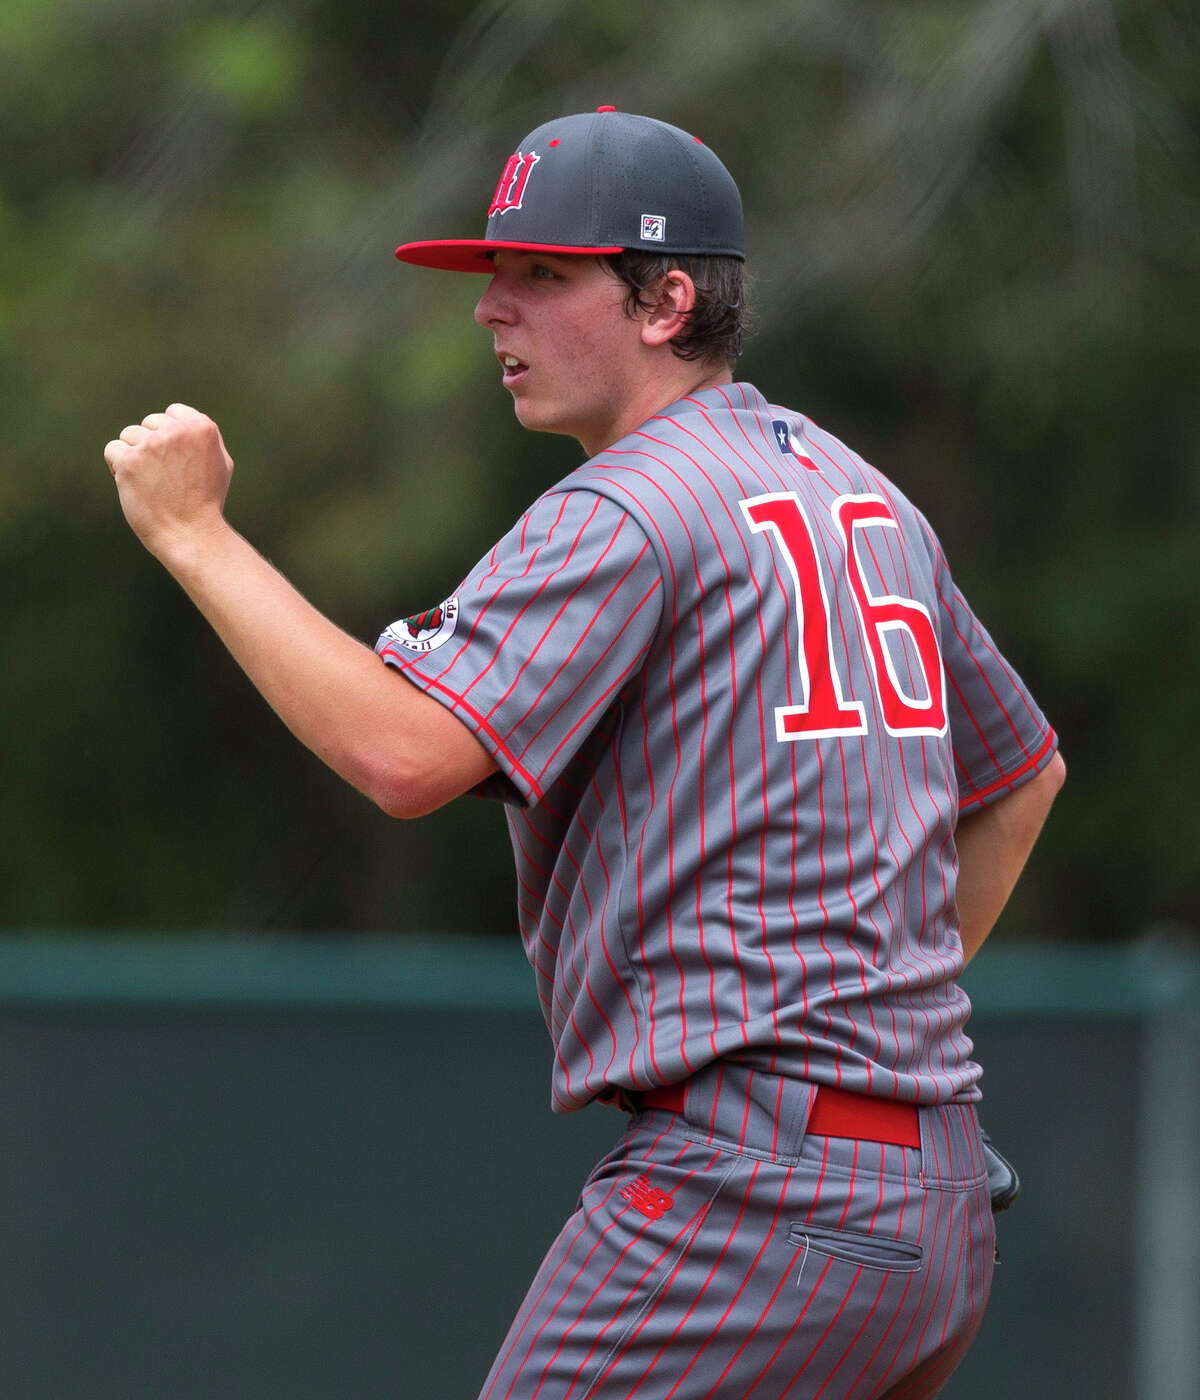 The Woodlands starting pitcher Steven Beard (16) gives a fist pump after a strike call during the fifth inning of a high school baseball game at the Wings-N-More Classic Friday, March 10, 2017, in The Woodlands. The Woodlands defeated Keller 16-4.